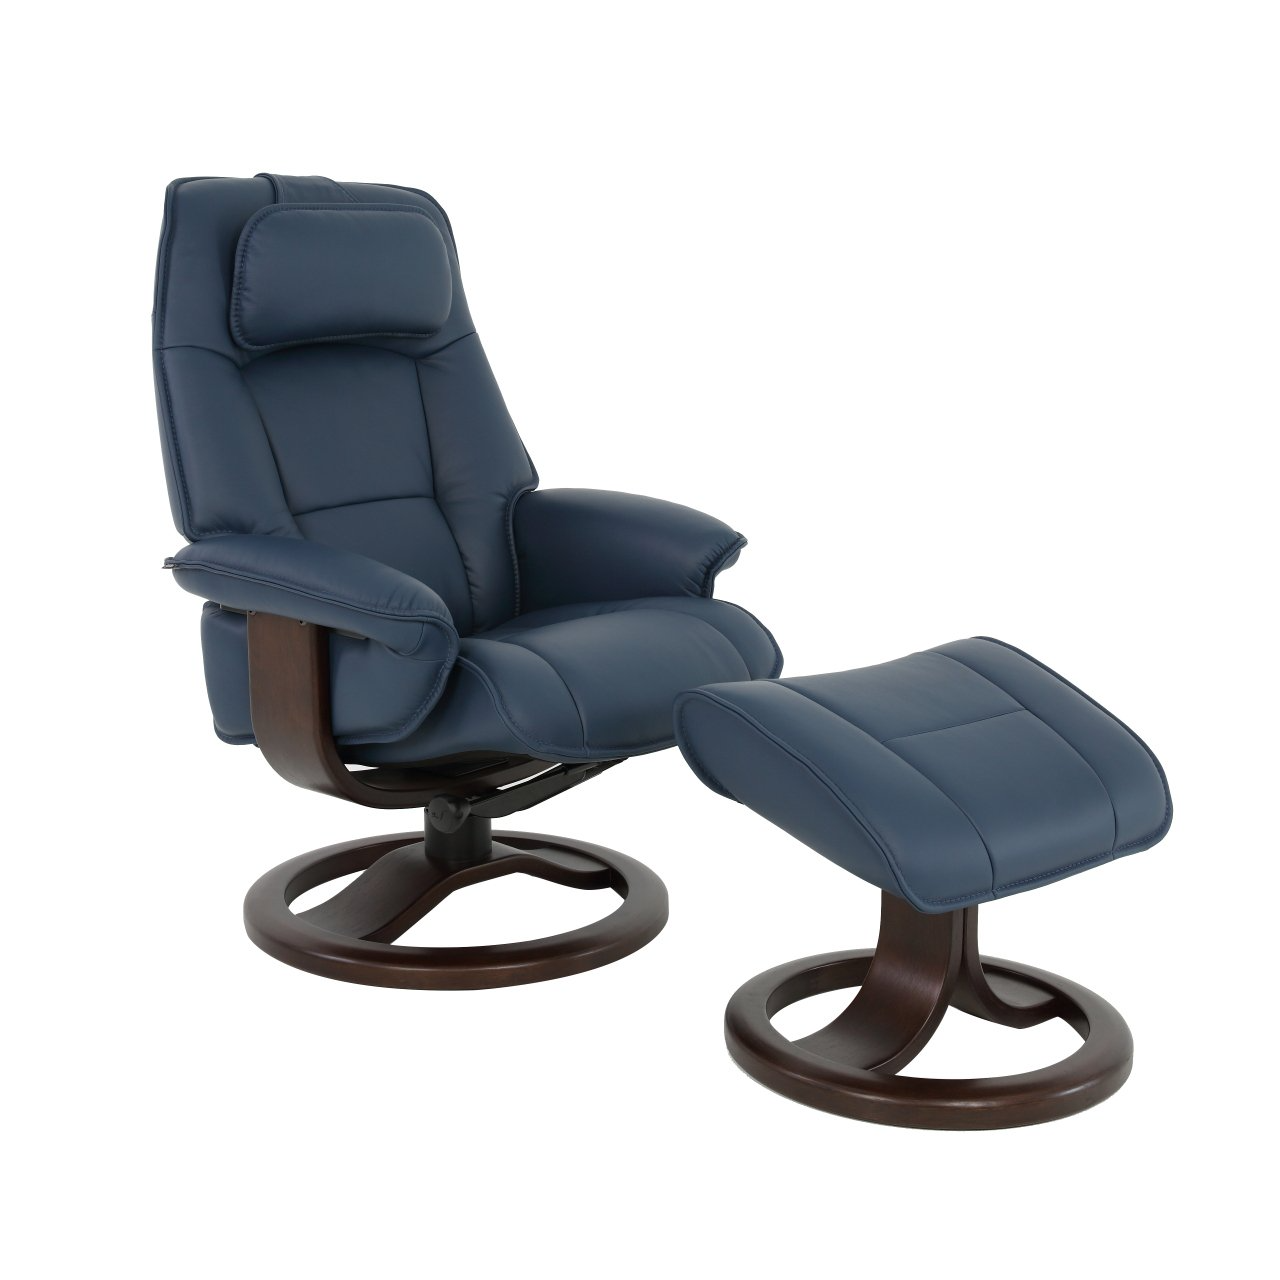 Fjords Admiral R Norwegian Quality Recliner from Viking Trader